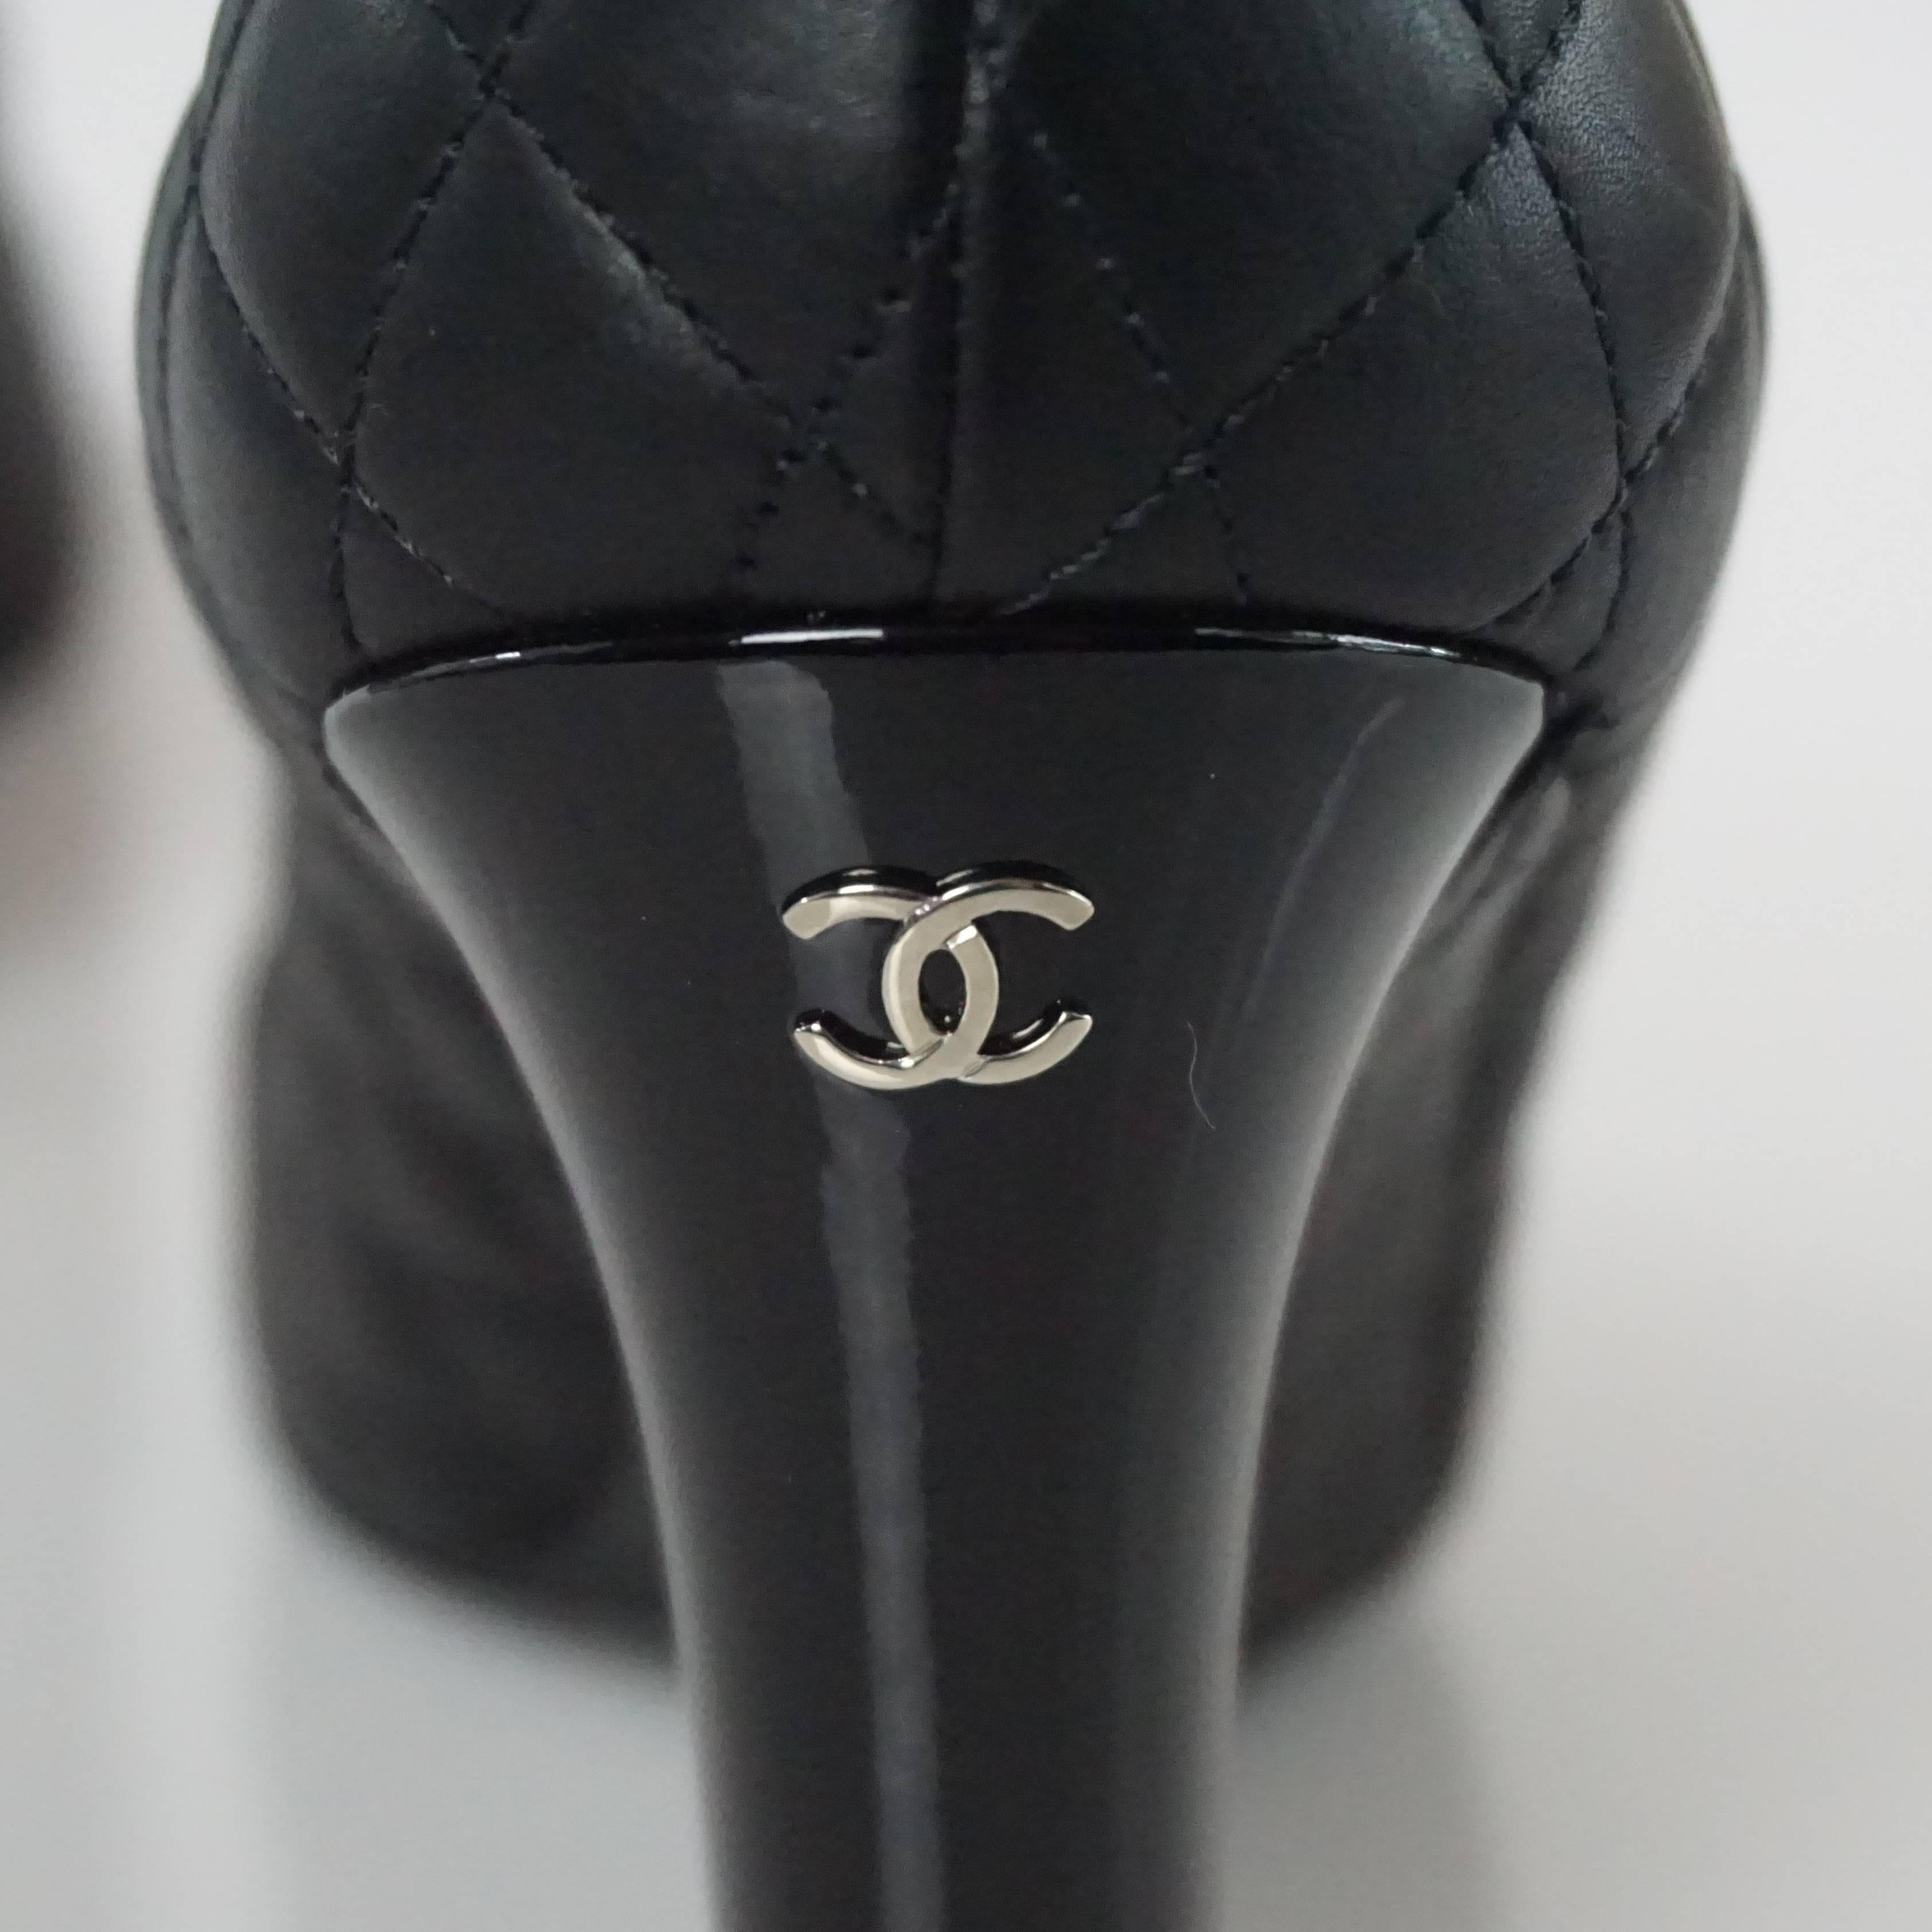 Chanel Black Quilted Leather and Patent Wedges - 38 1